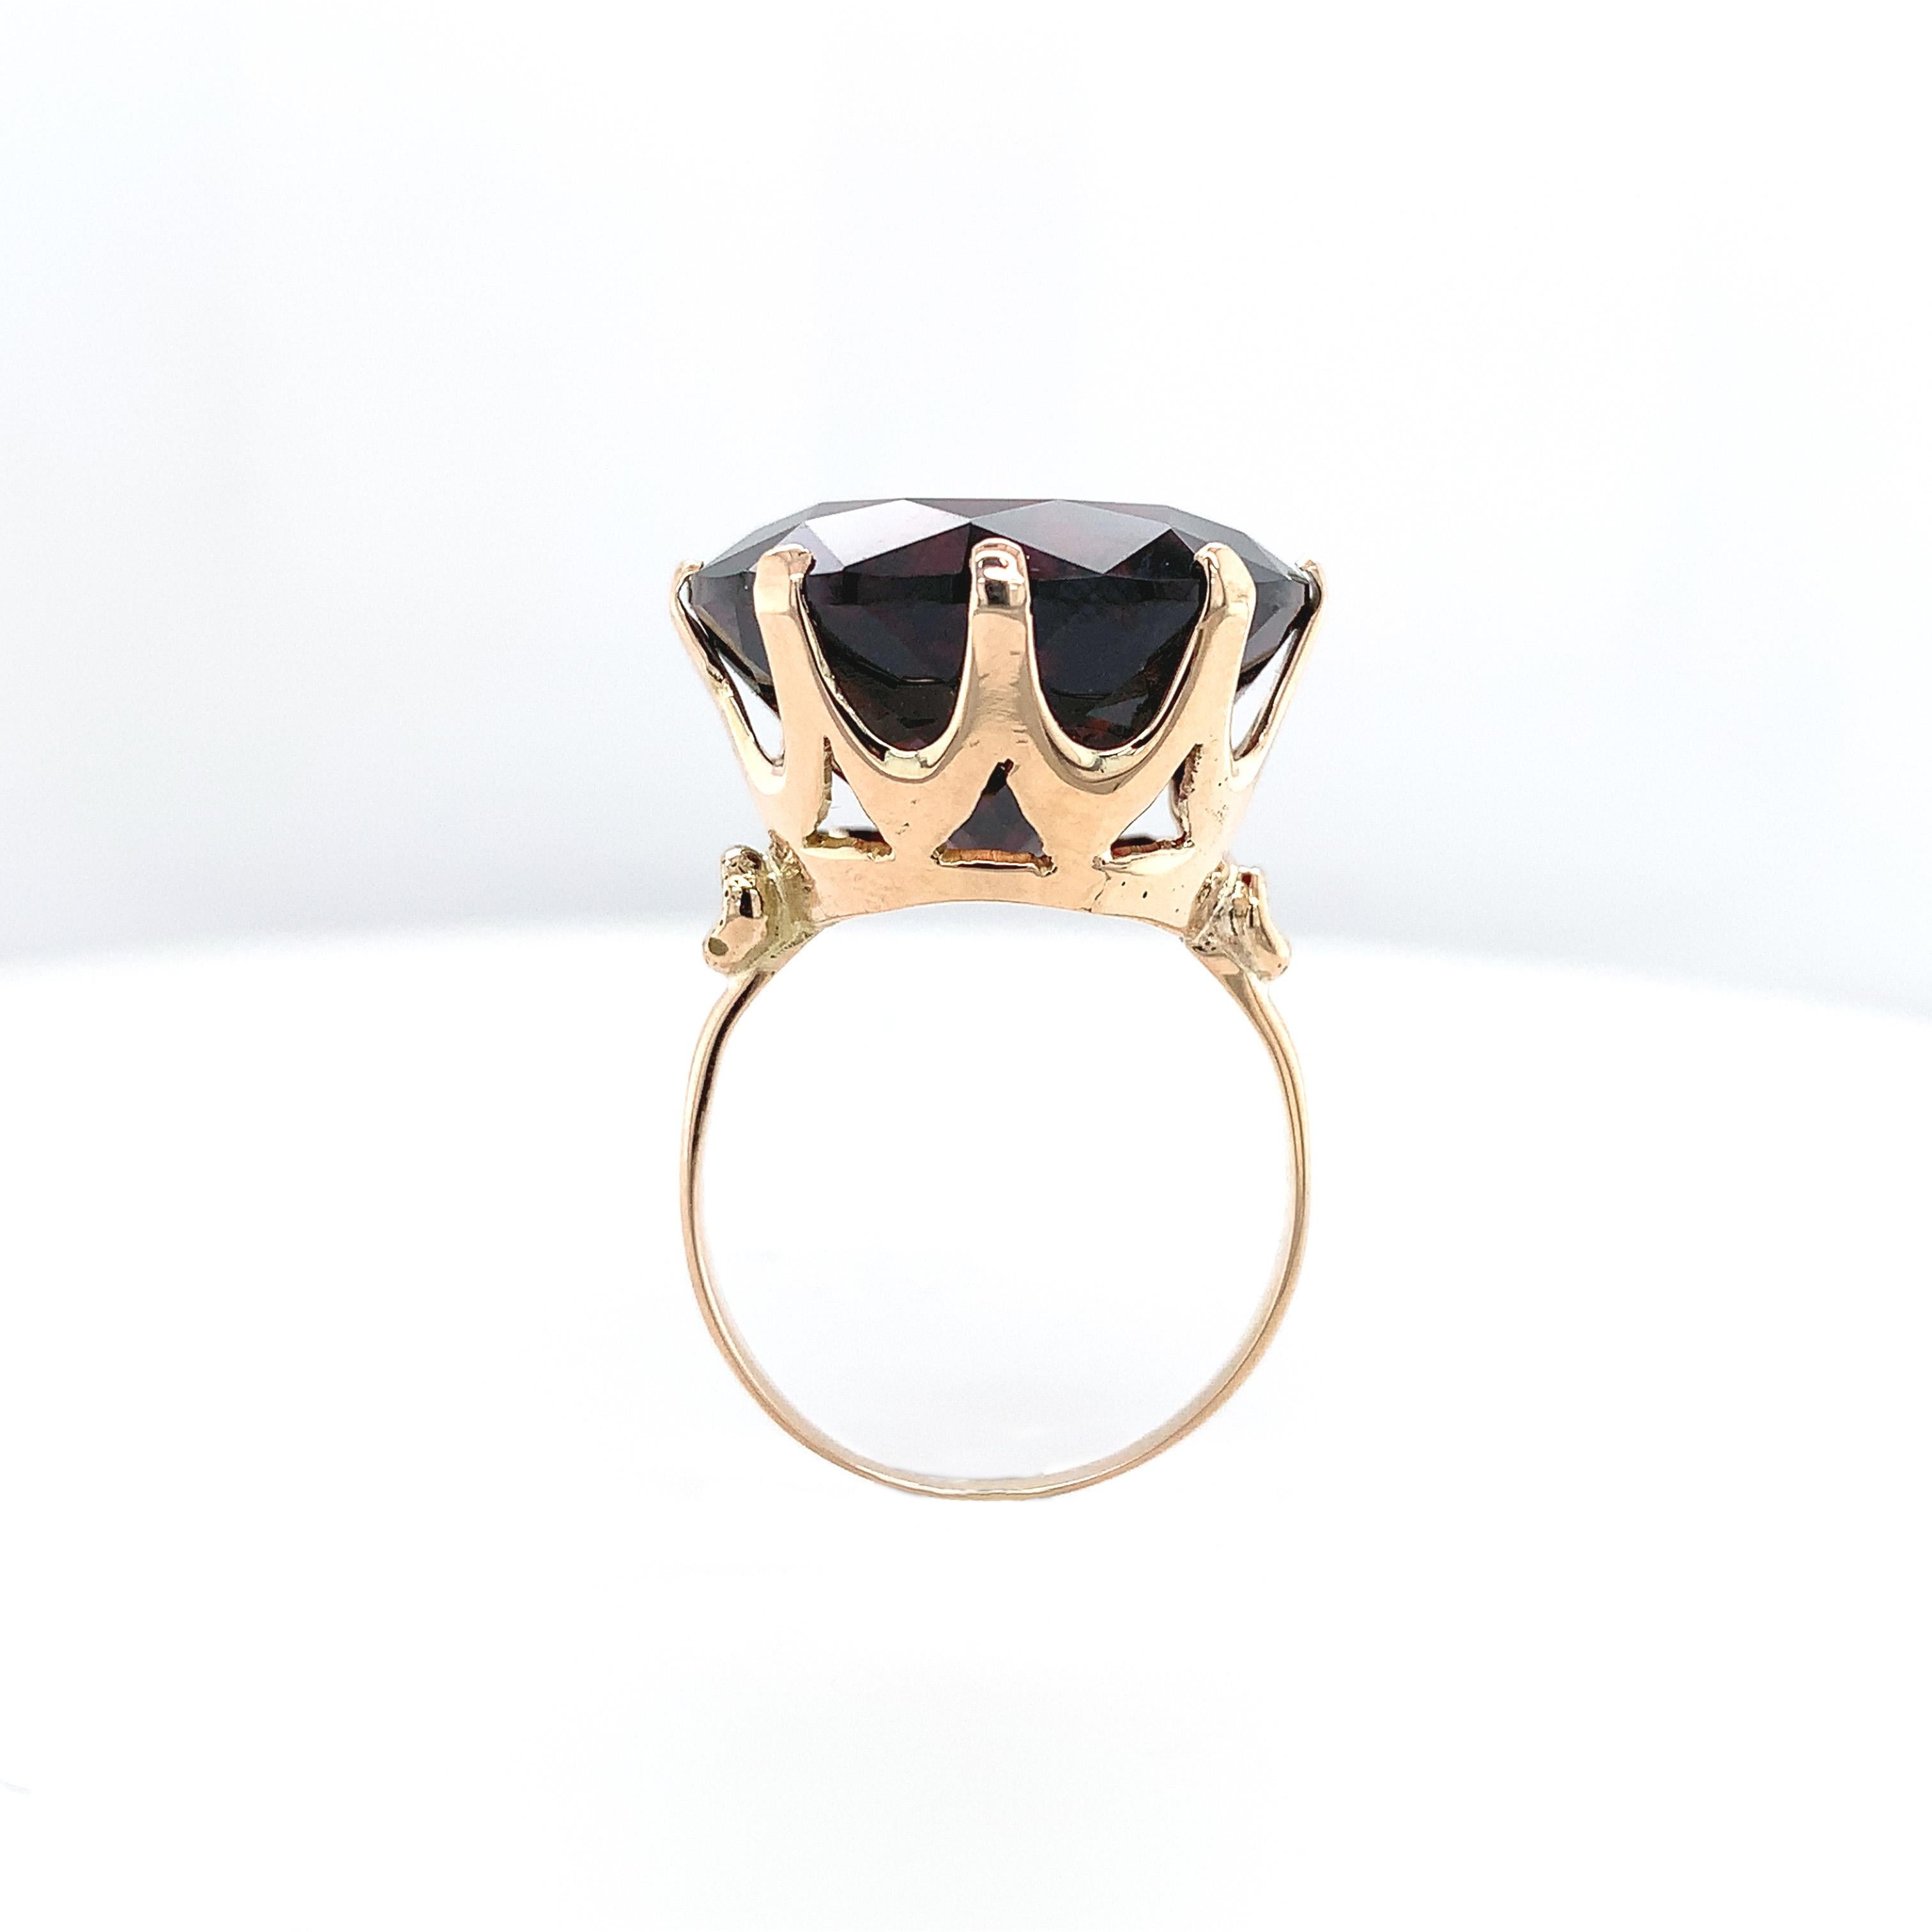 14K Yellow gold solitaire ring featuring a huge round garnet weighing 27.24 carats. The deep red garnet measures almost 18mm. The ring fits a size 7 finger and is easily sized. It weighs 5.35dwt and dates from the 1950's with all new prongs.